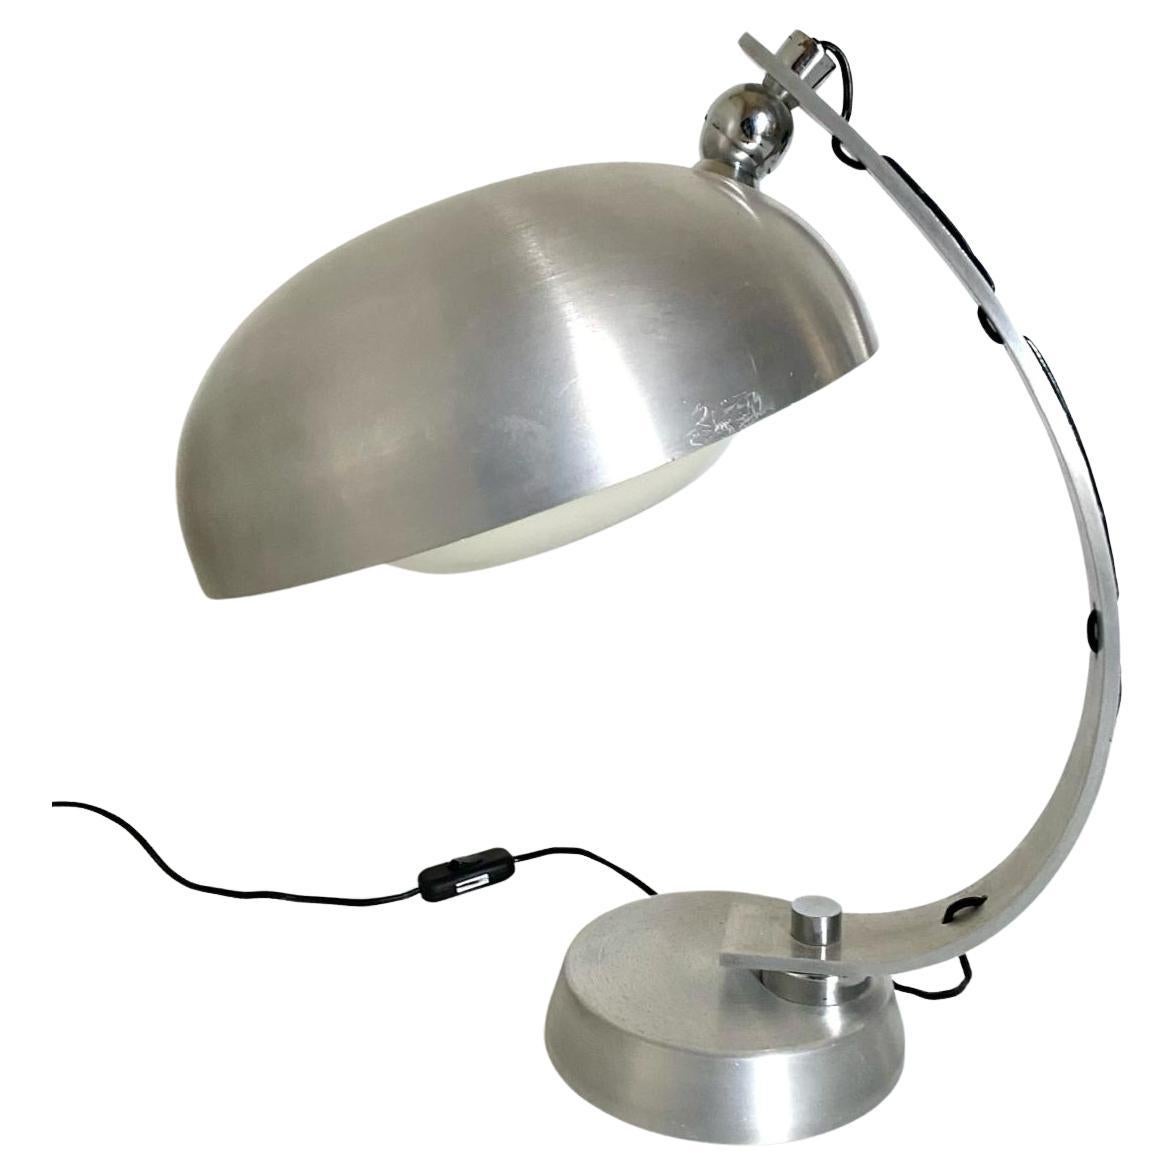 1970s vintage table lamp in industrial style. Designed by Angelo Lelli for Arredoluce in the 1970s. Aluminium structure with flexible lampshade. The lamp has been recabled whilist its structure has been refined. In really good conditions with only